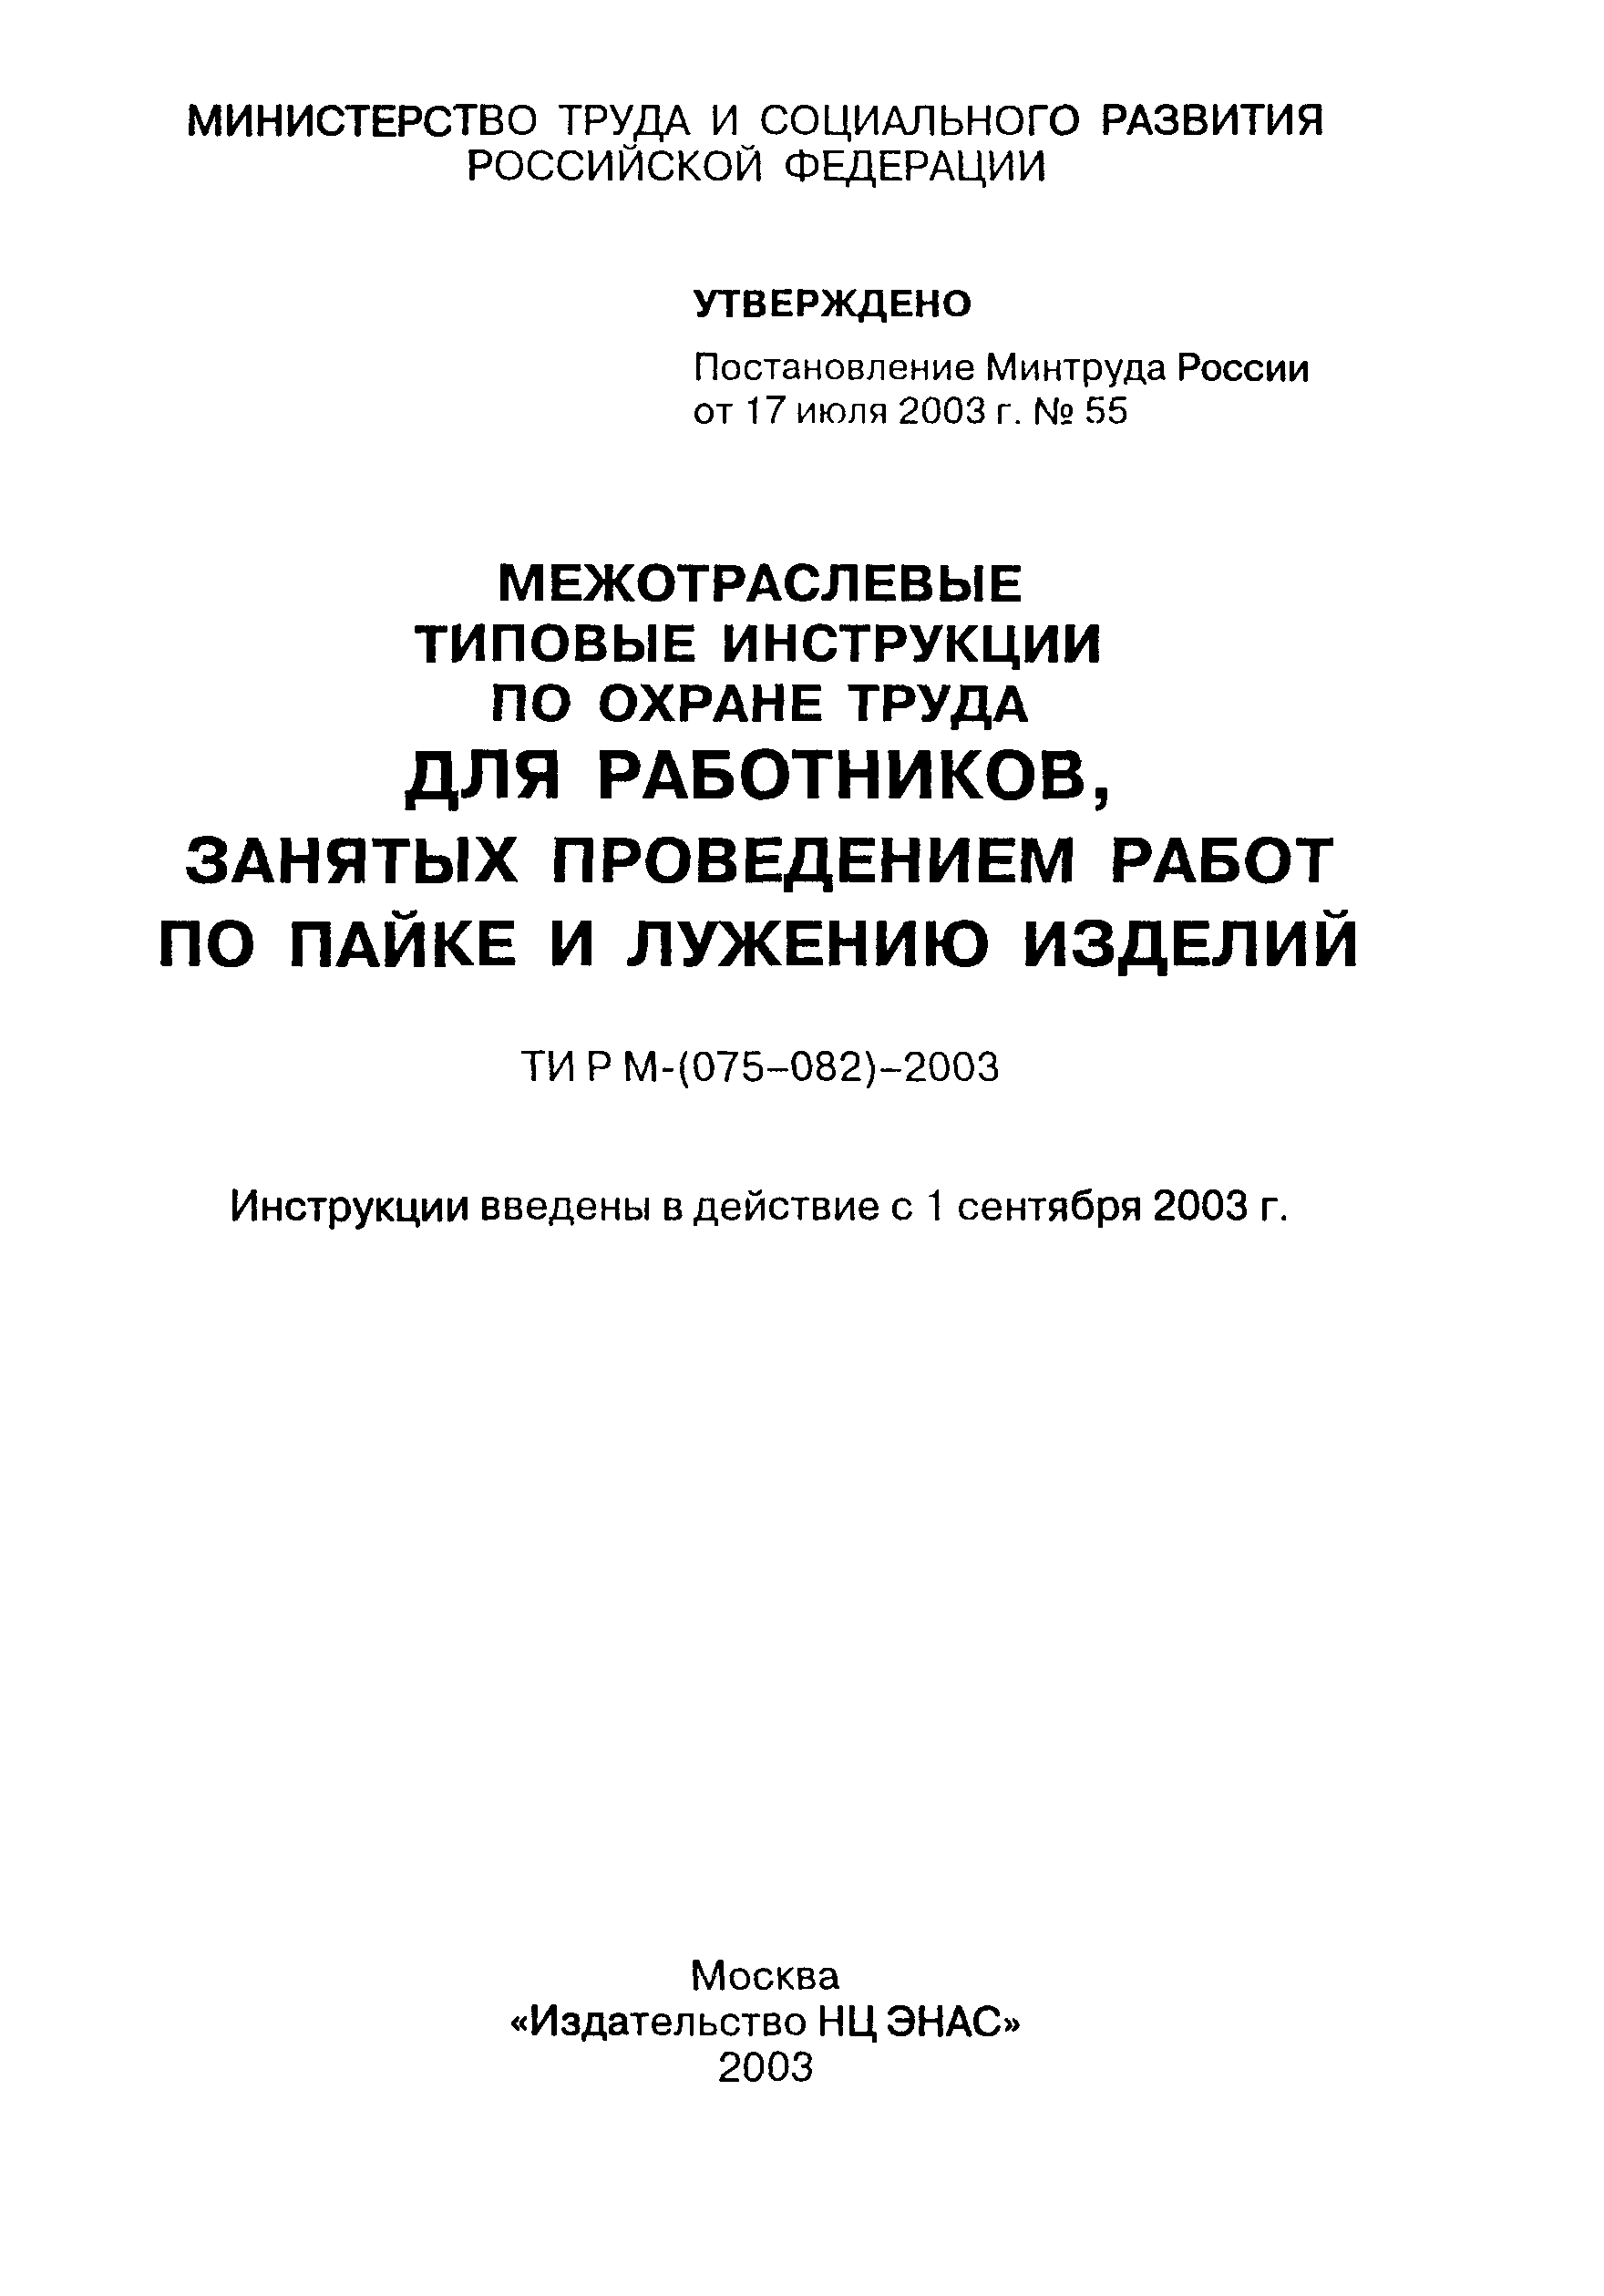 ТИ Р М-075-2003